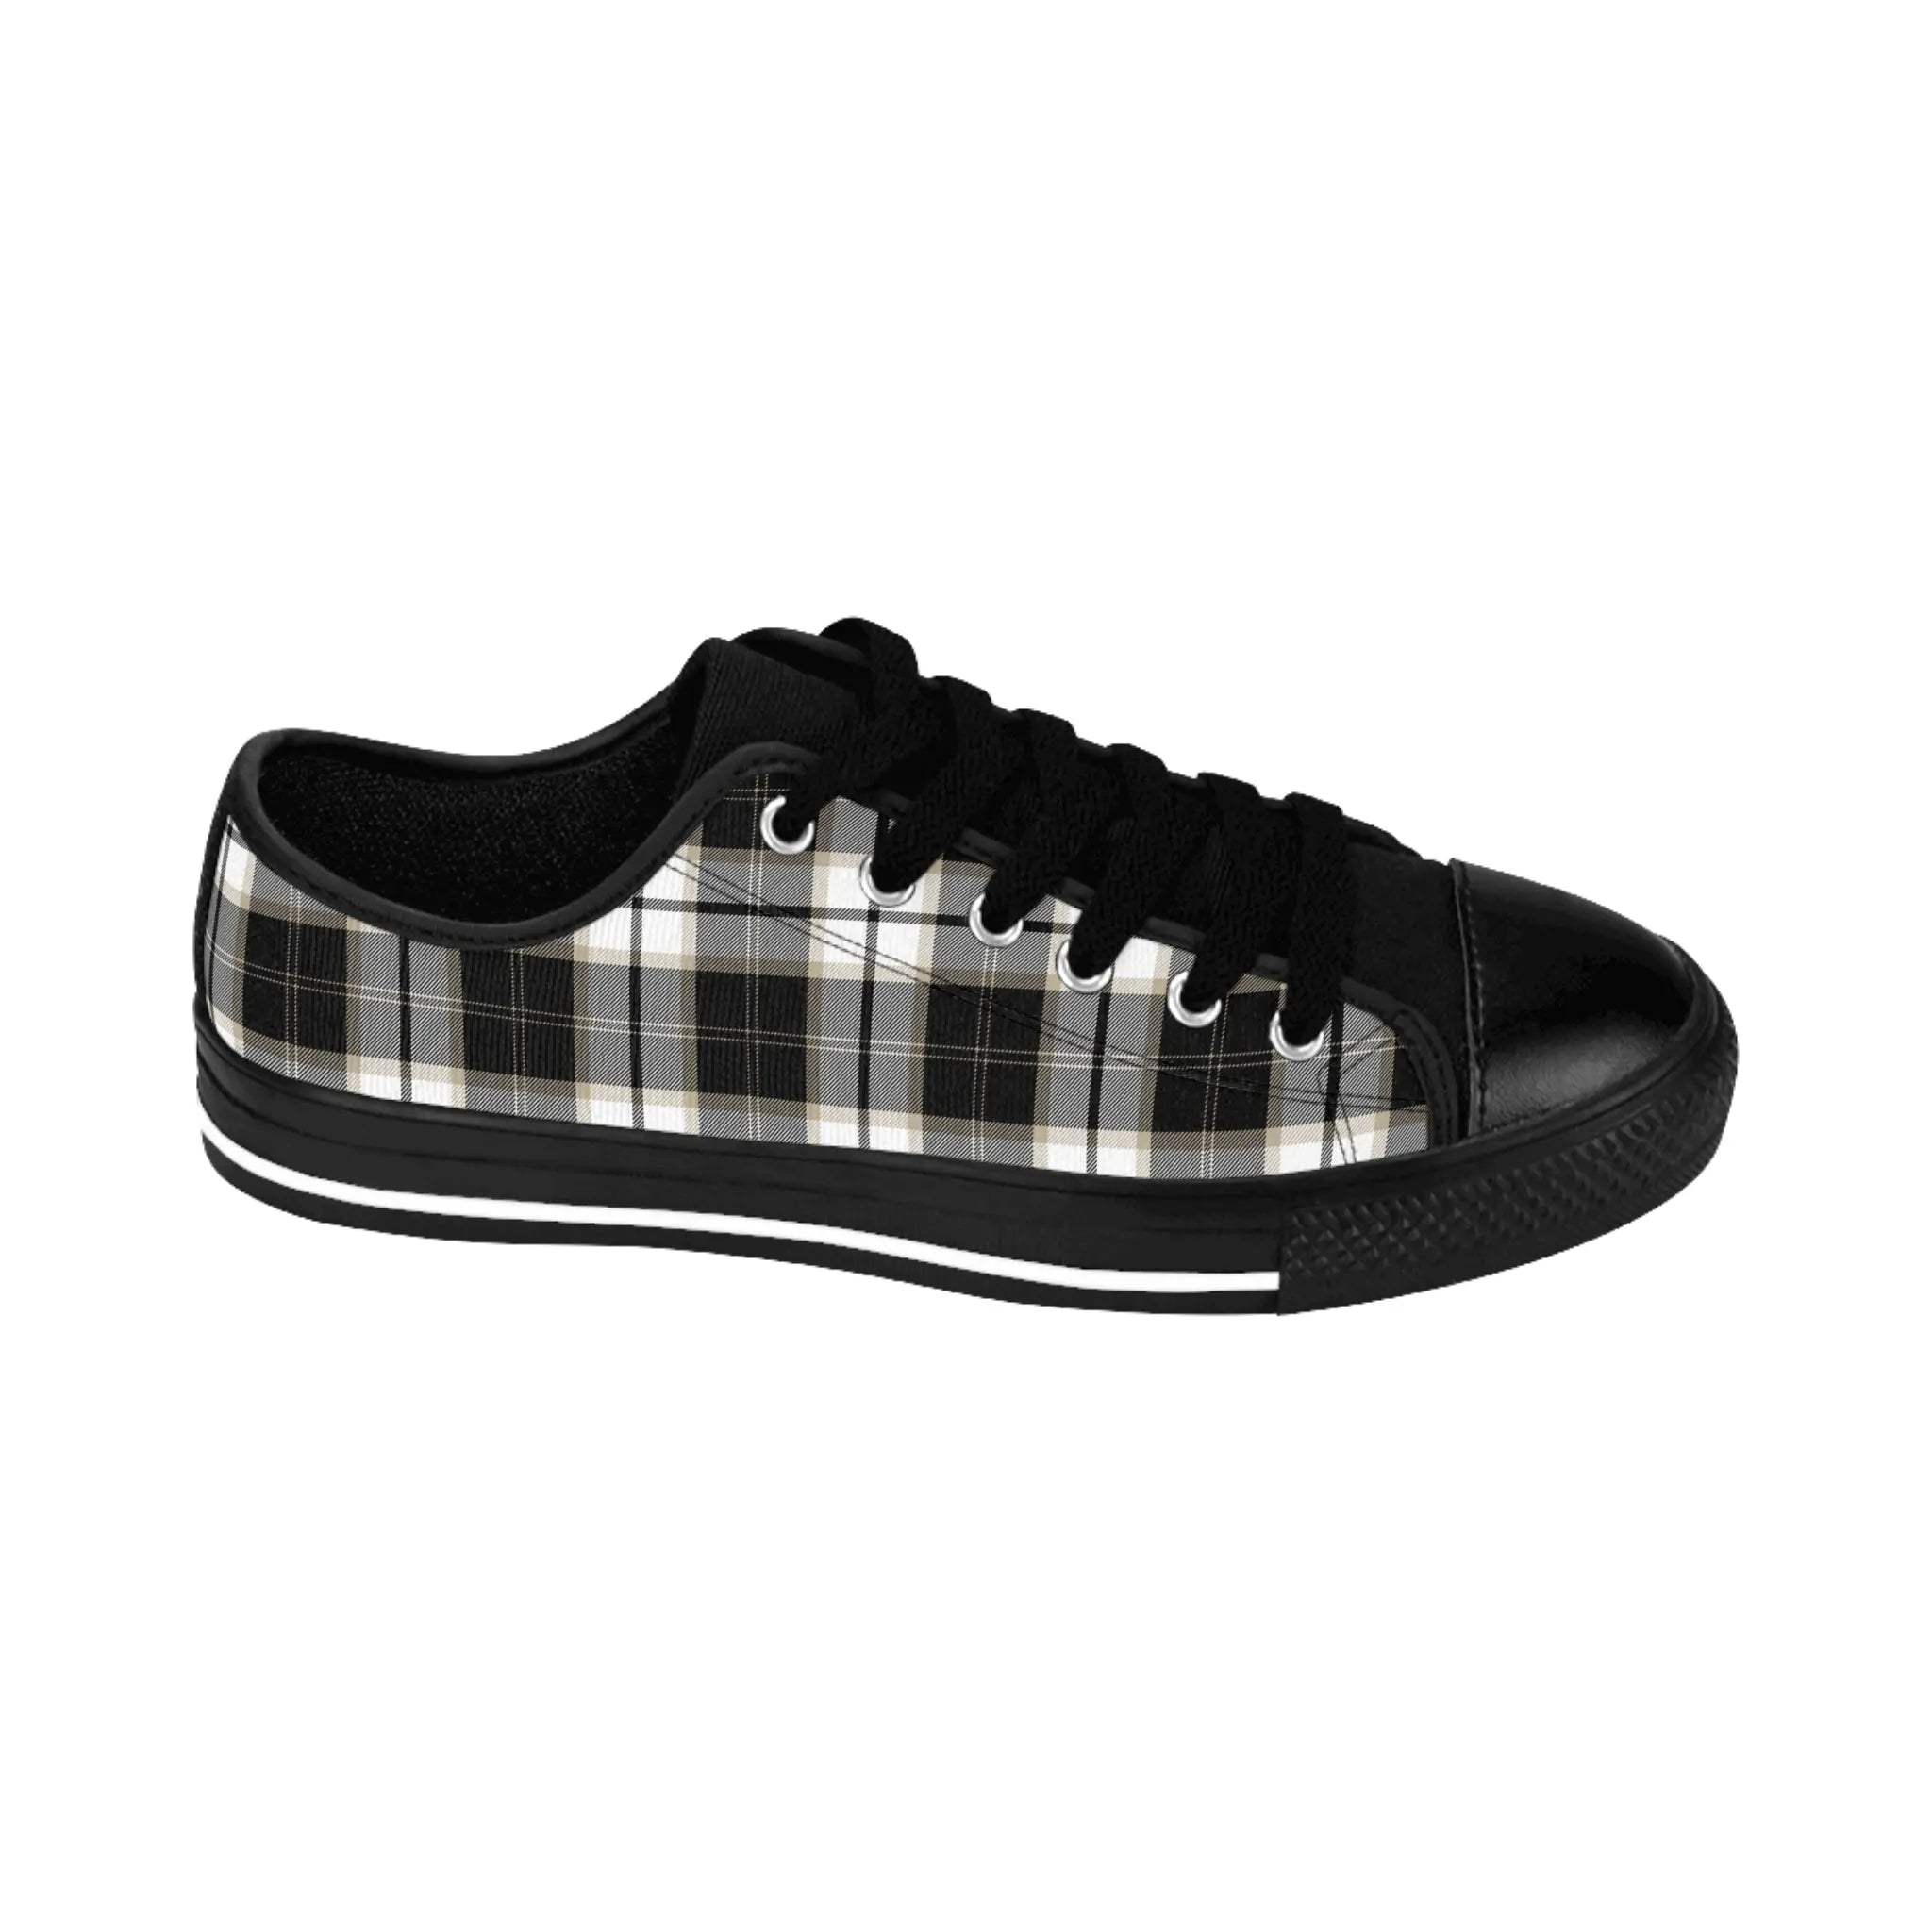  Groove Fashion Collection Black and White Plaid Women's Low Top Canvas Shoes ShoesUS9Blacksole